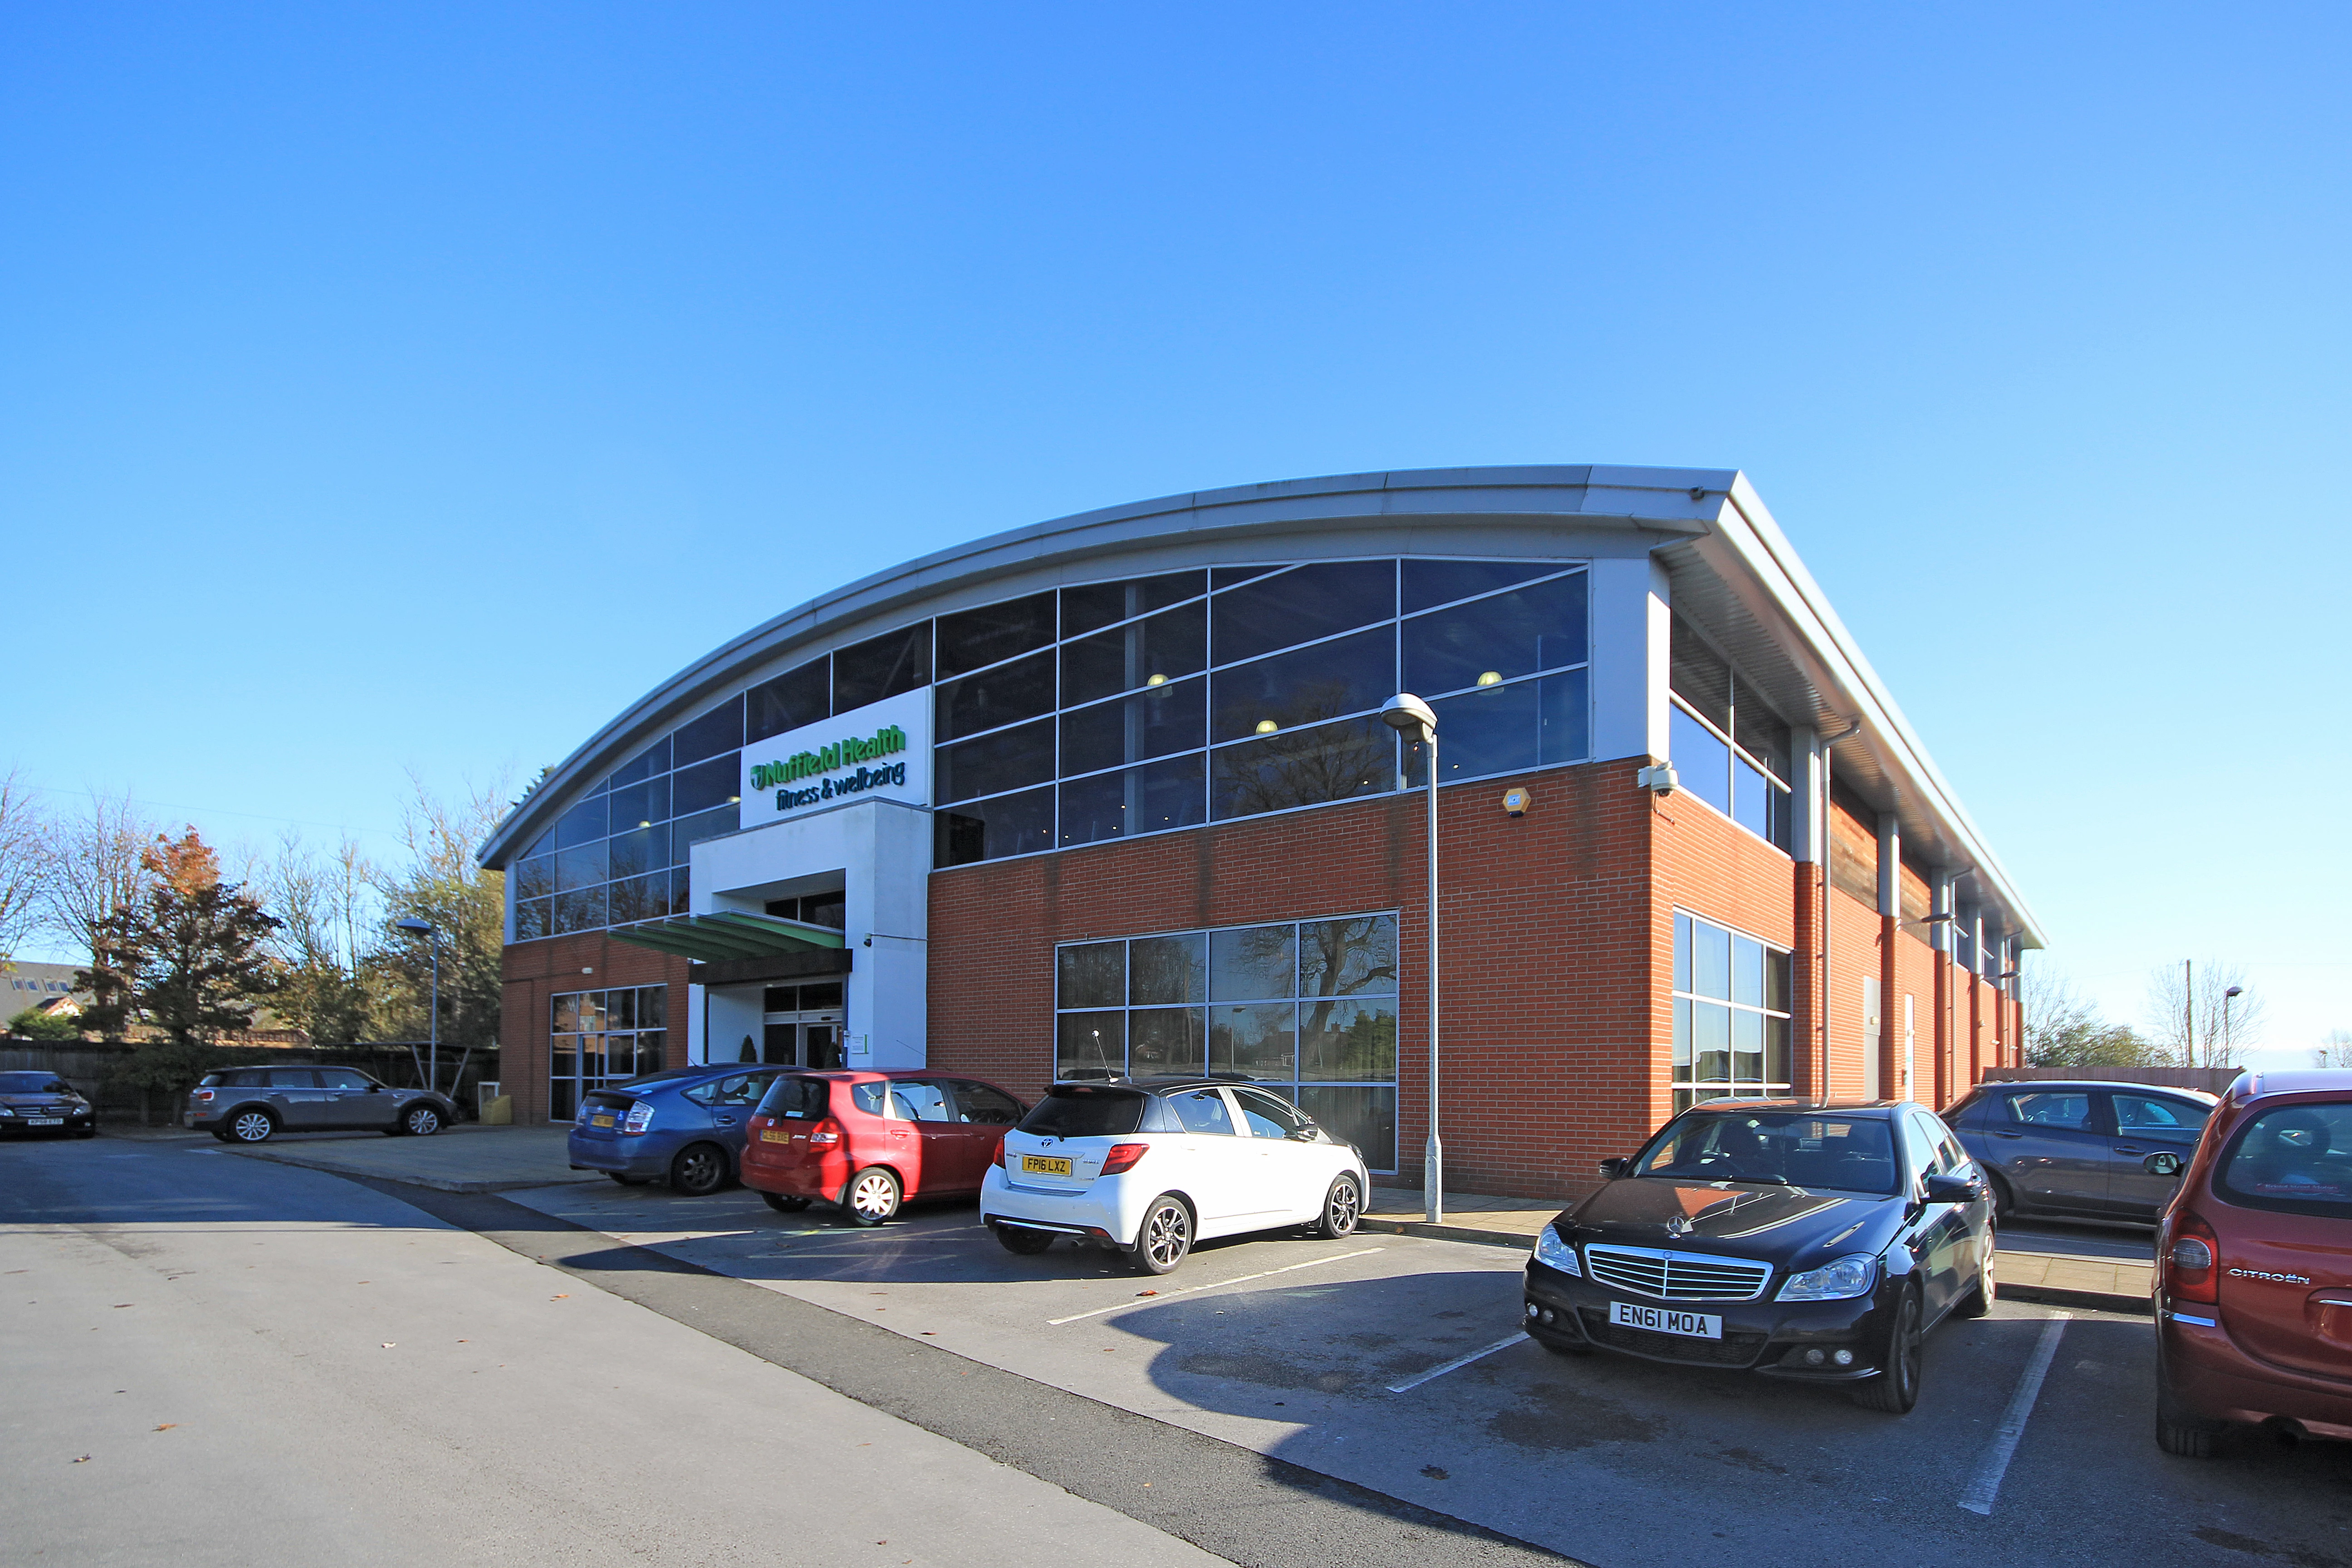 The Nuffield Wellbeing Centre